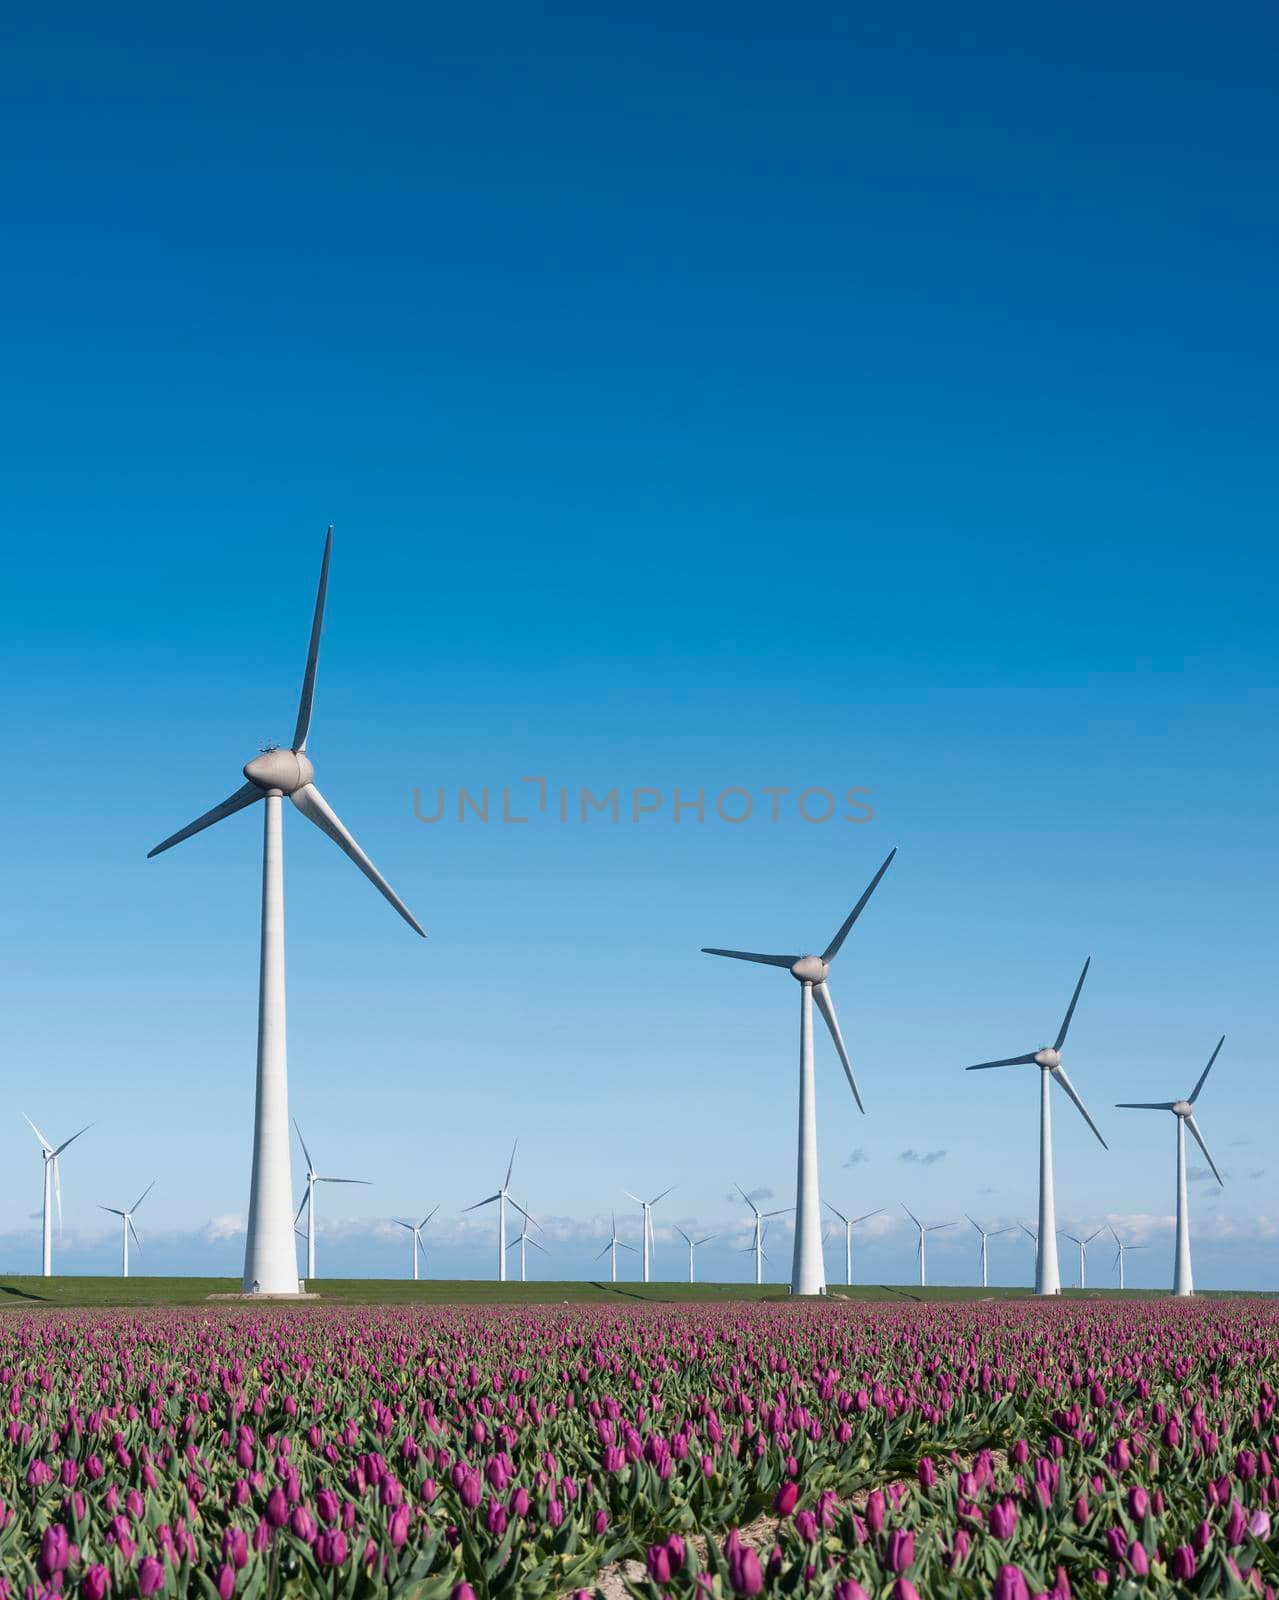 wind turbines and red tulips under blue sky in holland by ahavelaar